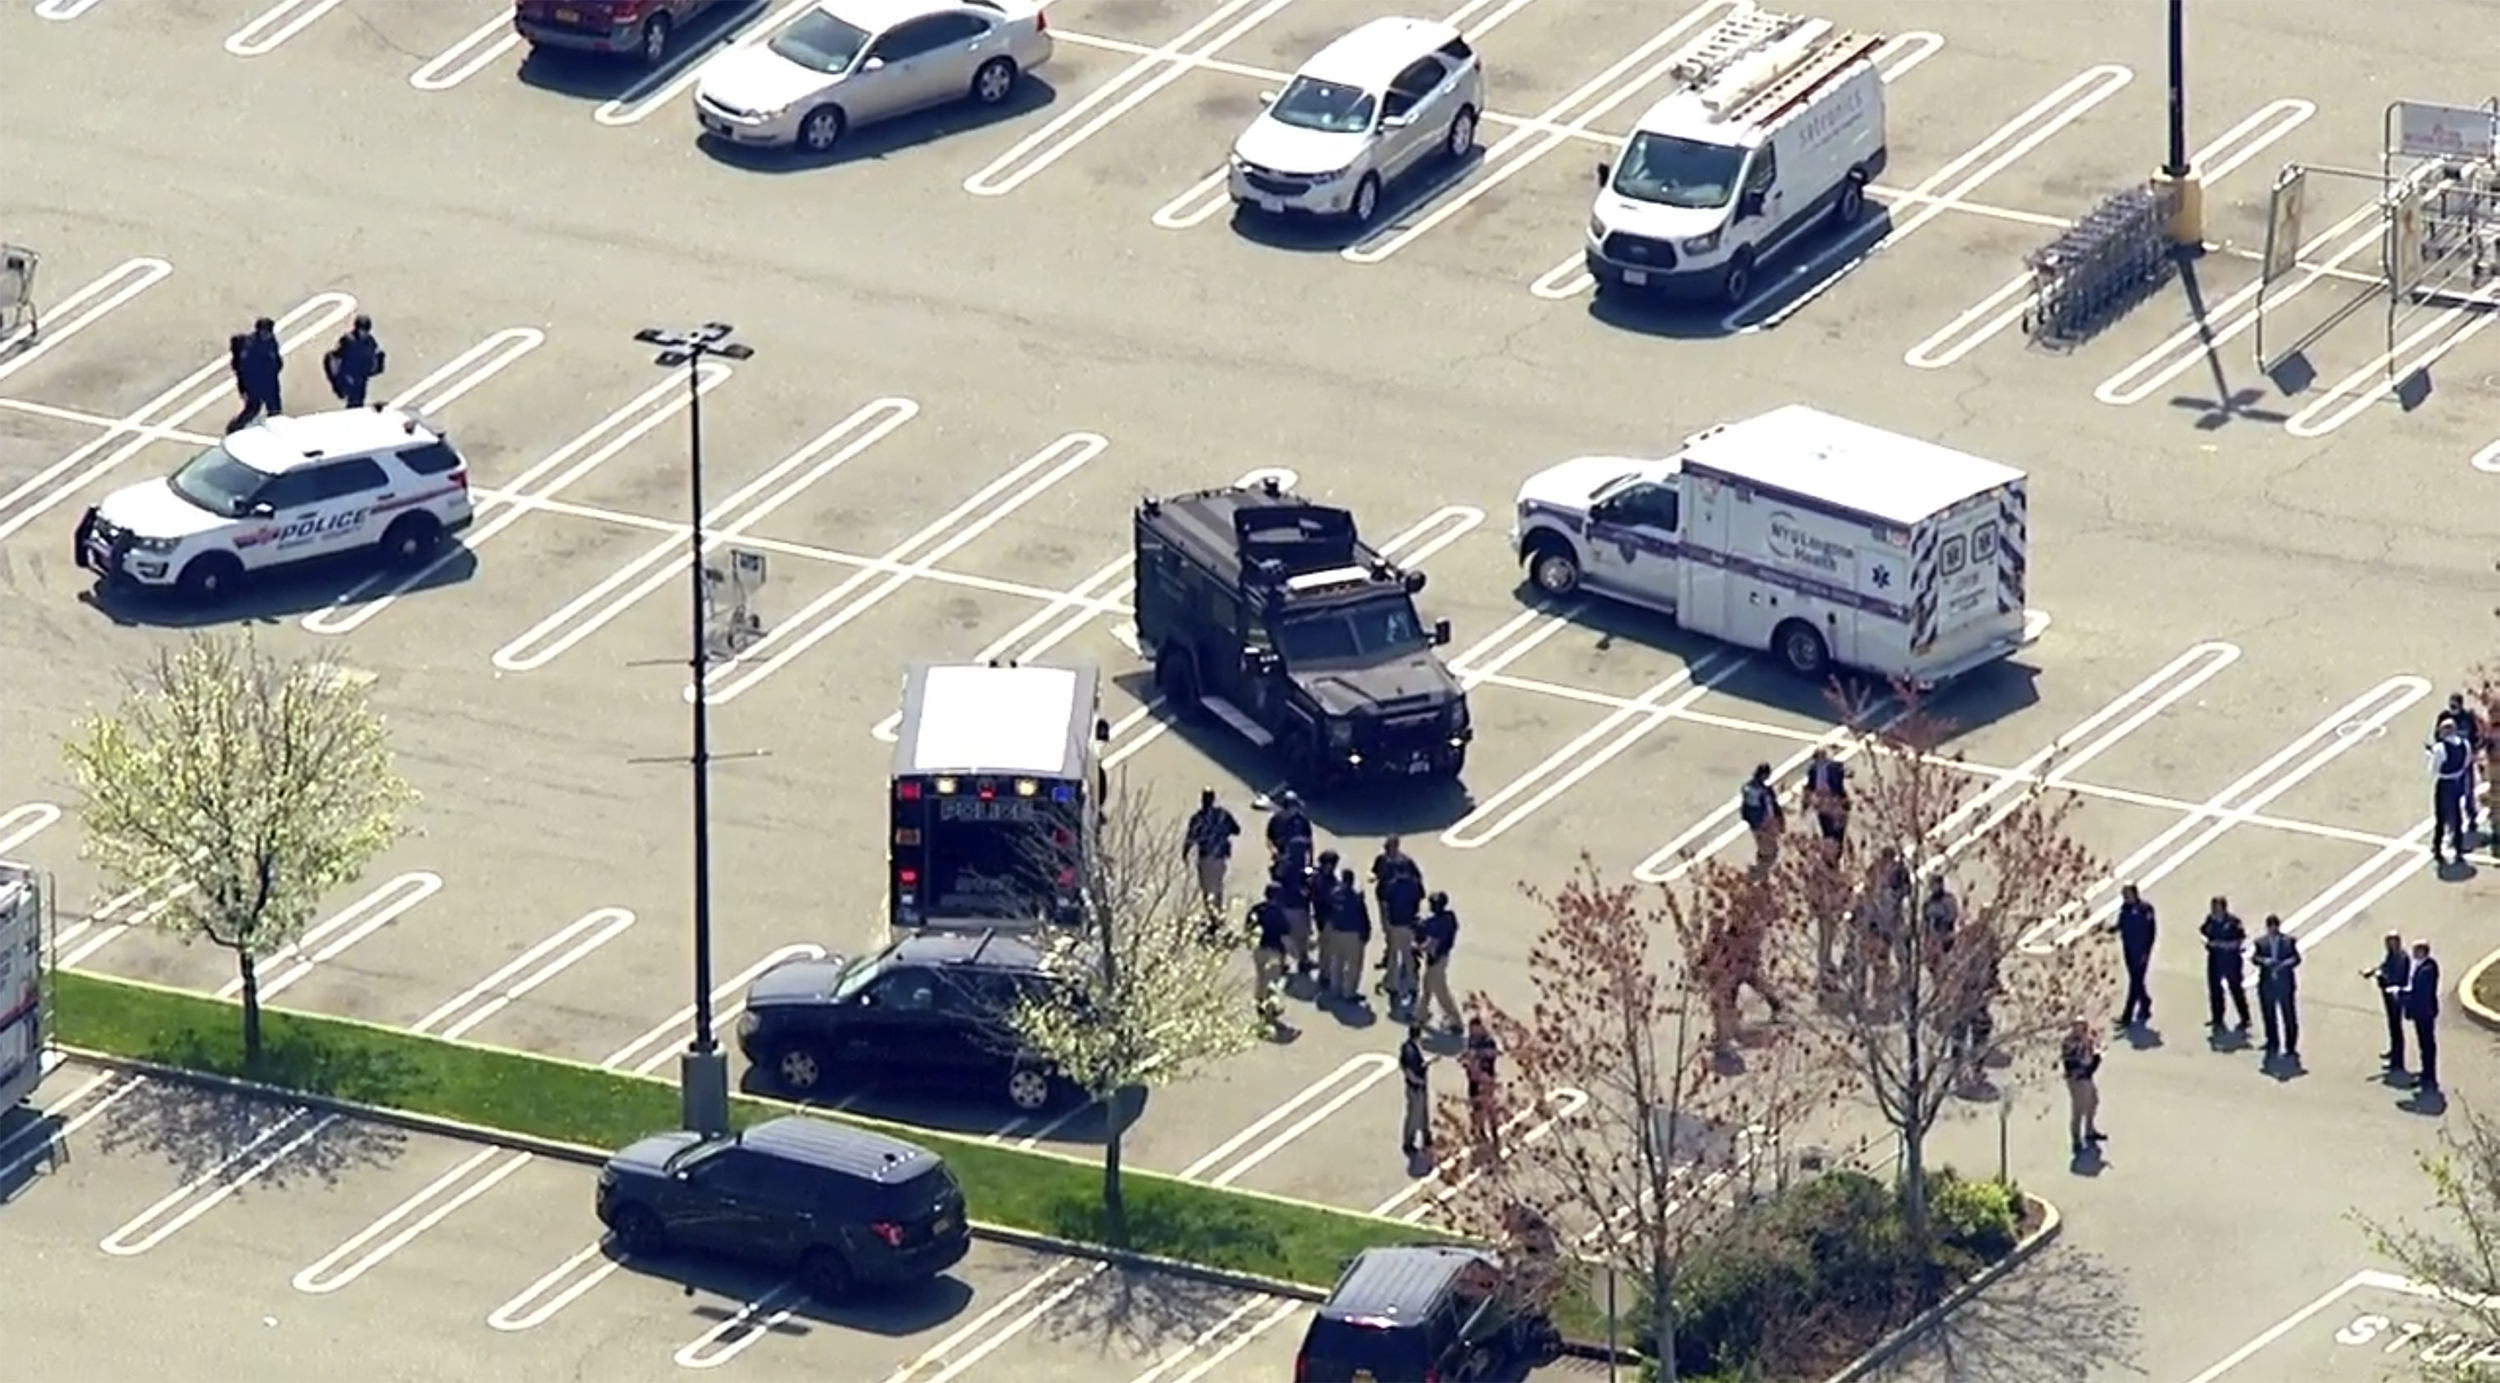 This aerial photo provided by WABC shows police responding to the scene of a shooting at a Stop & Shop supermarket in West Hempstead, N.Y., on Tuesday, April 20, 2021. Nassau County Executive Laura Curran said in a tweet Tuesday there had been shooting at the Long Island supermarket and that the suspect has not been apprehended. (WABC via AP)